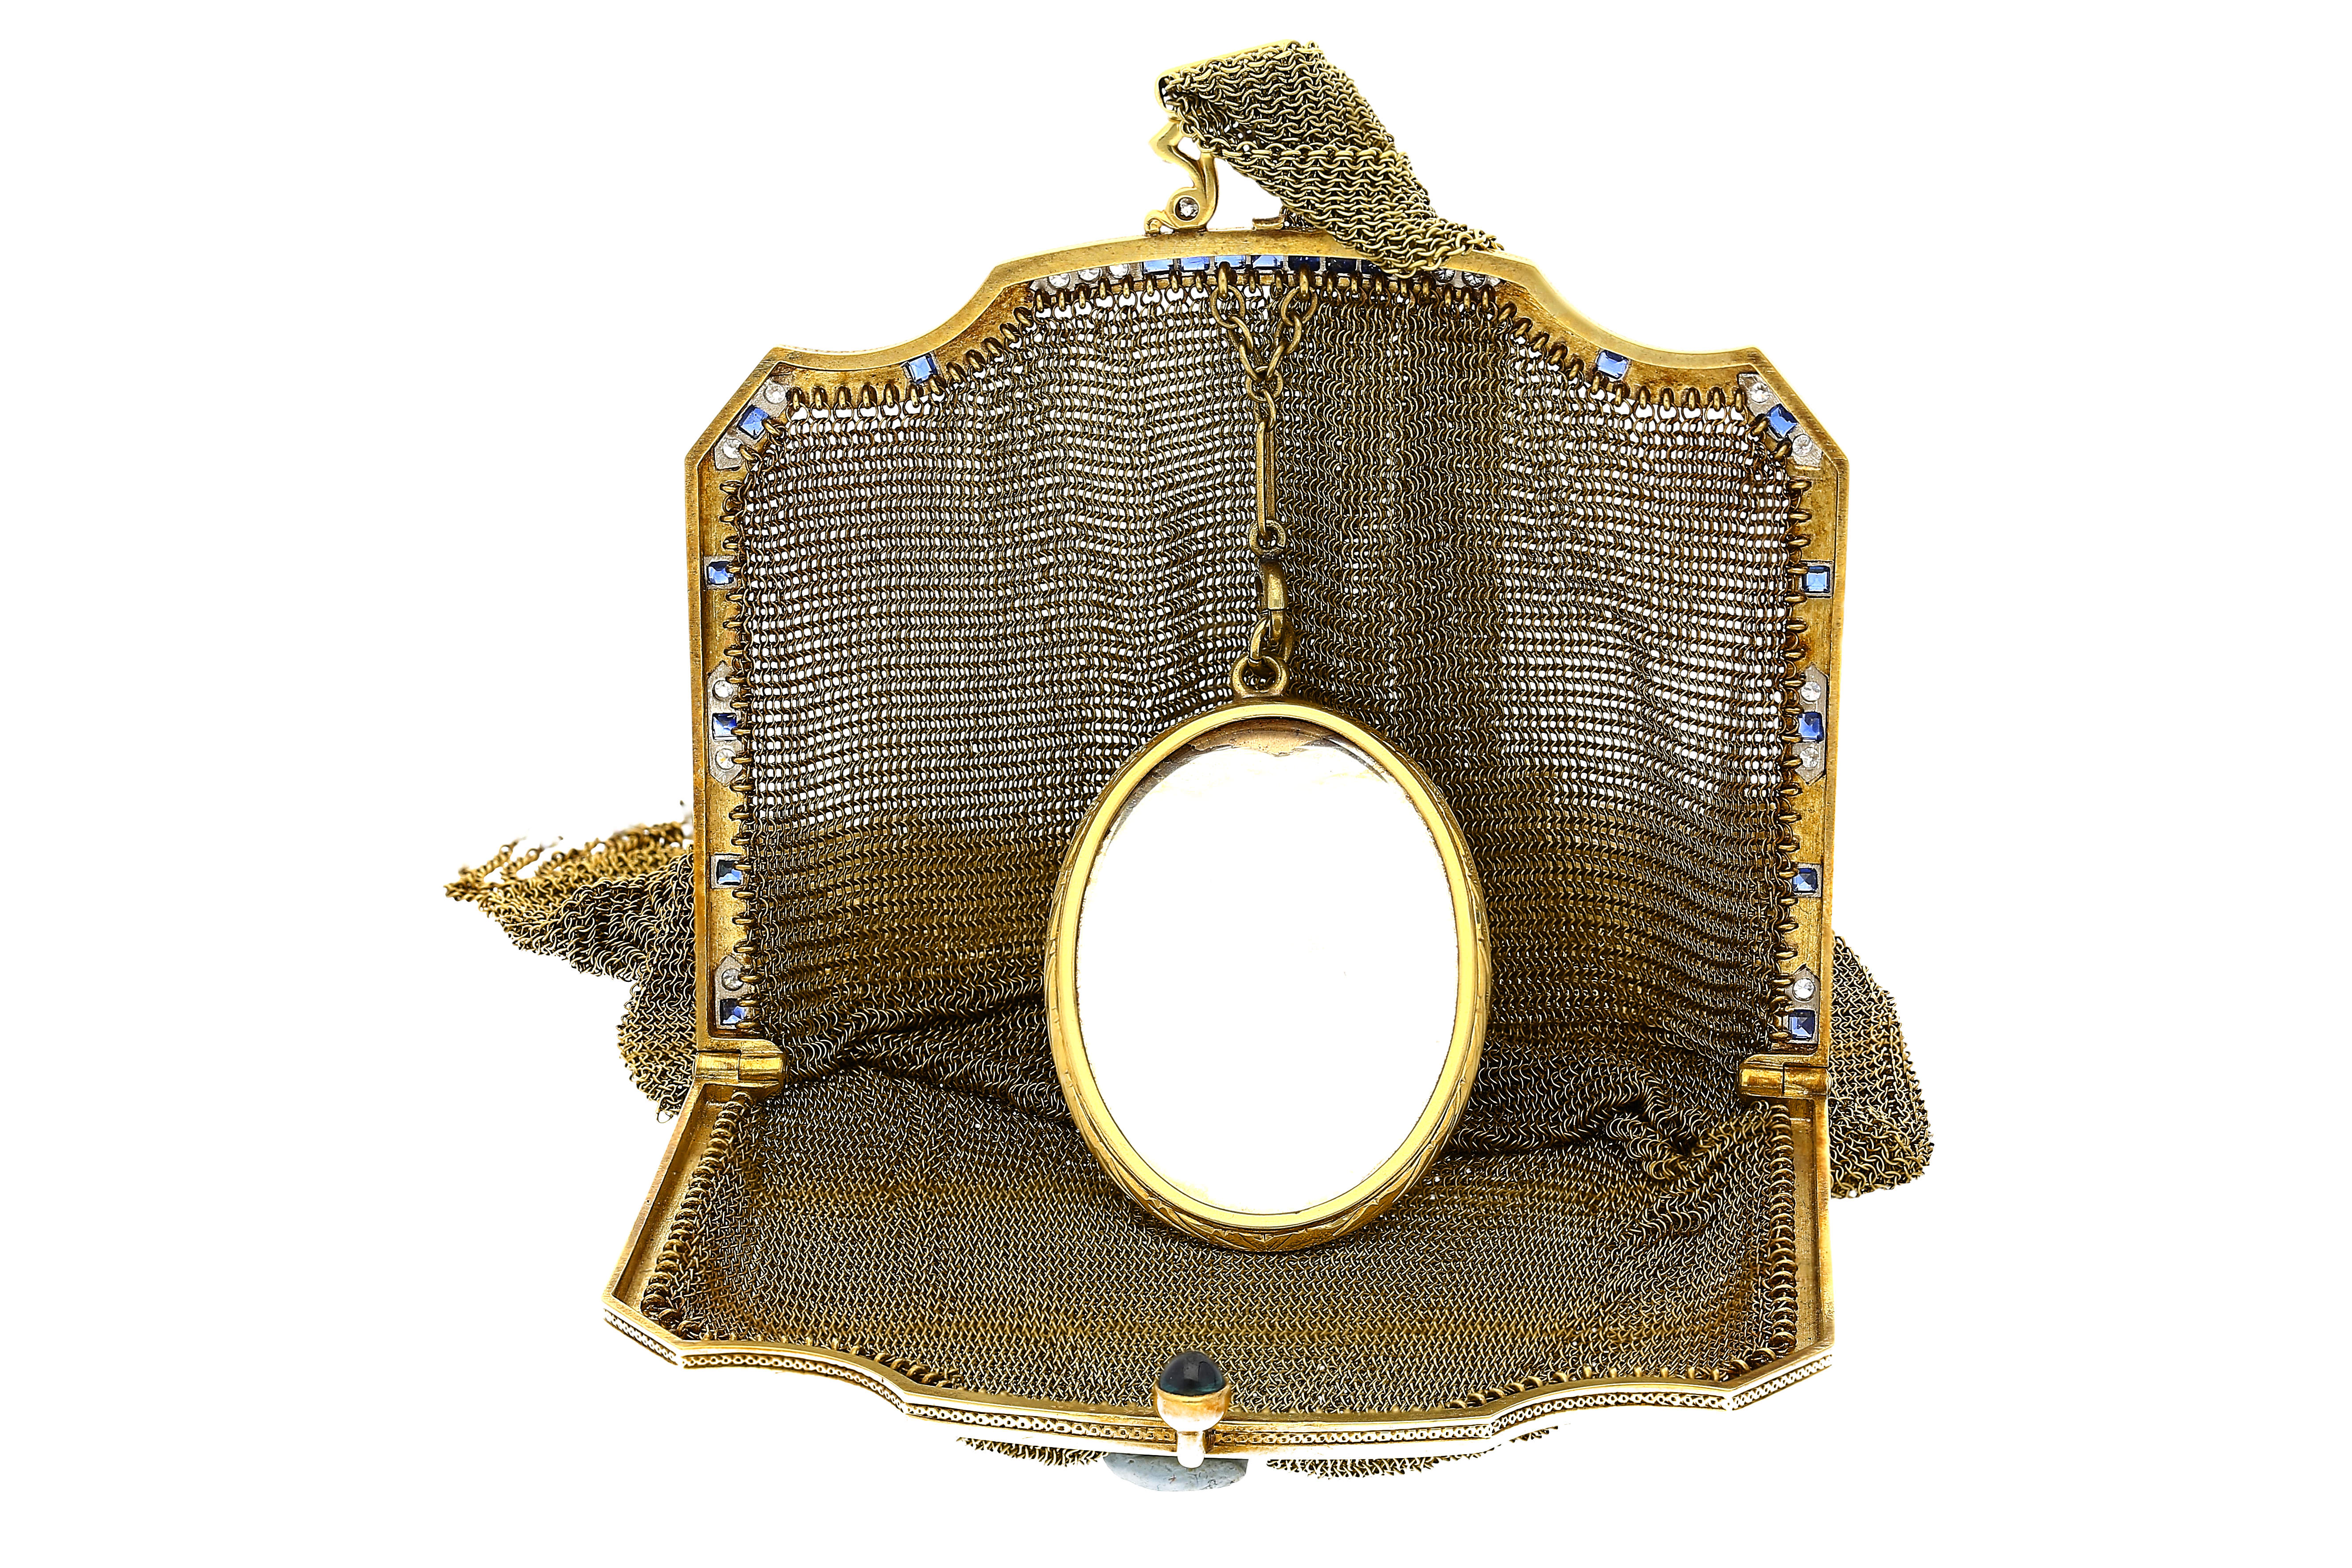 Antique Art Deco Evening Bag In 14k Gold, Platinum, Diamonds and Sapphires With Compact Mirror-Evening Bag-ASSAY